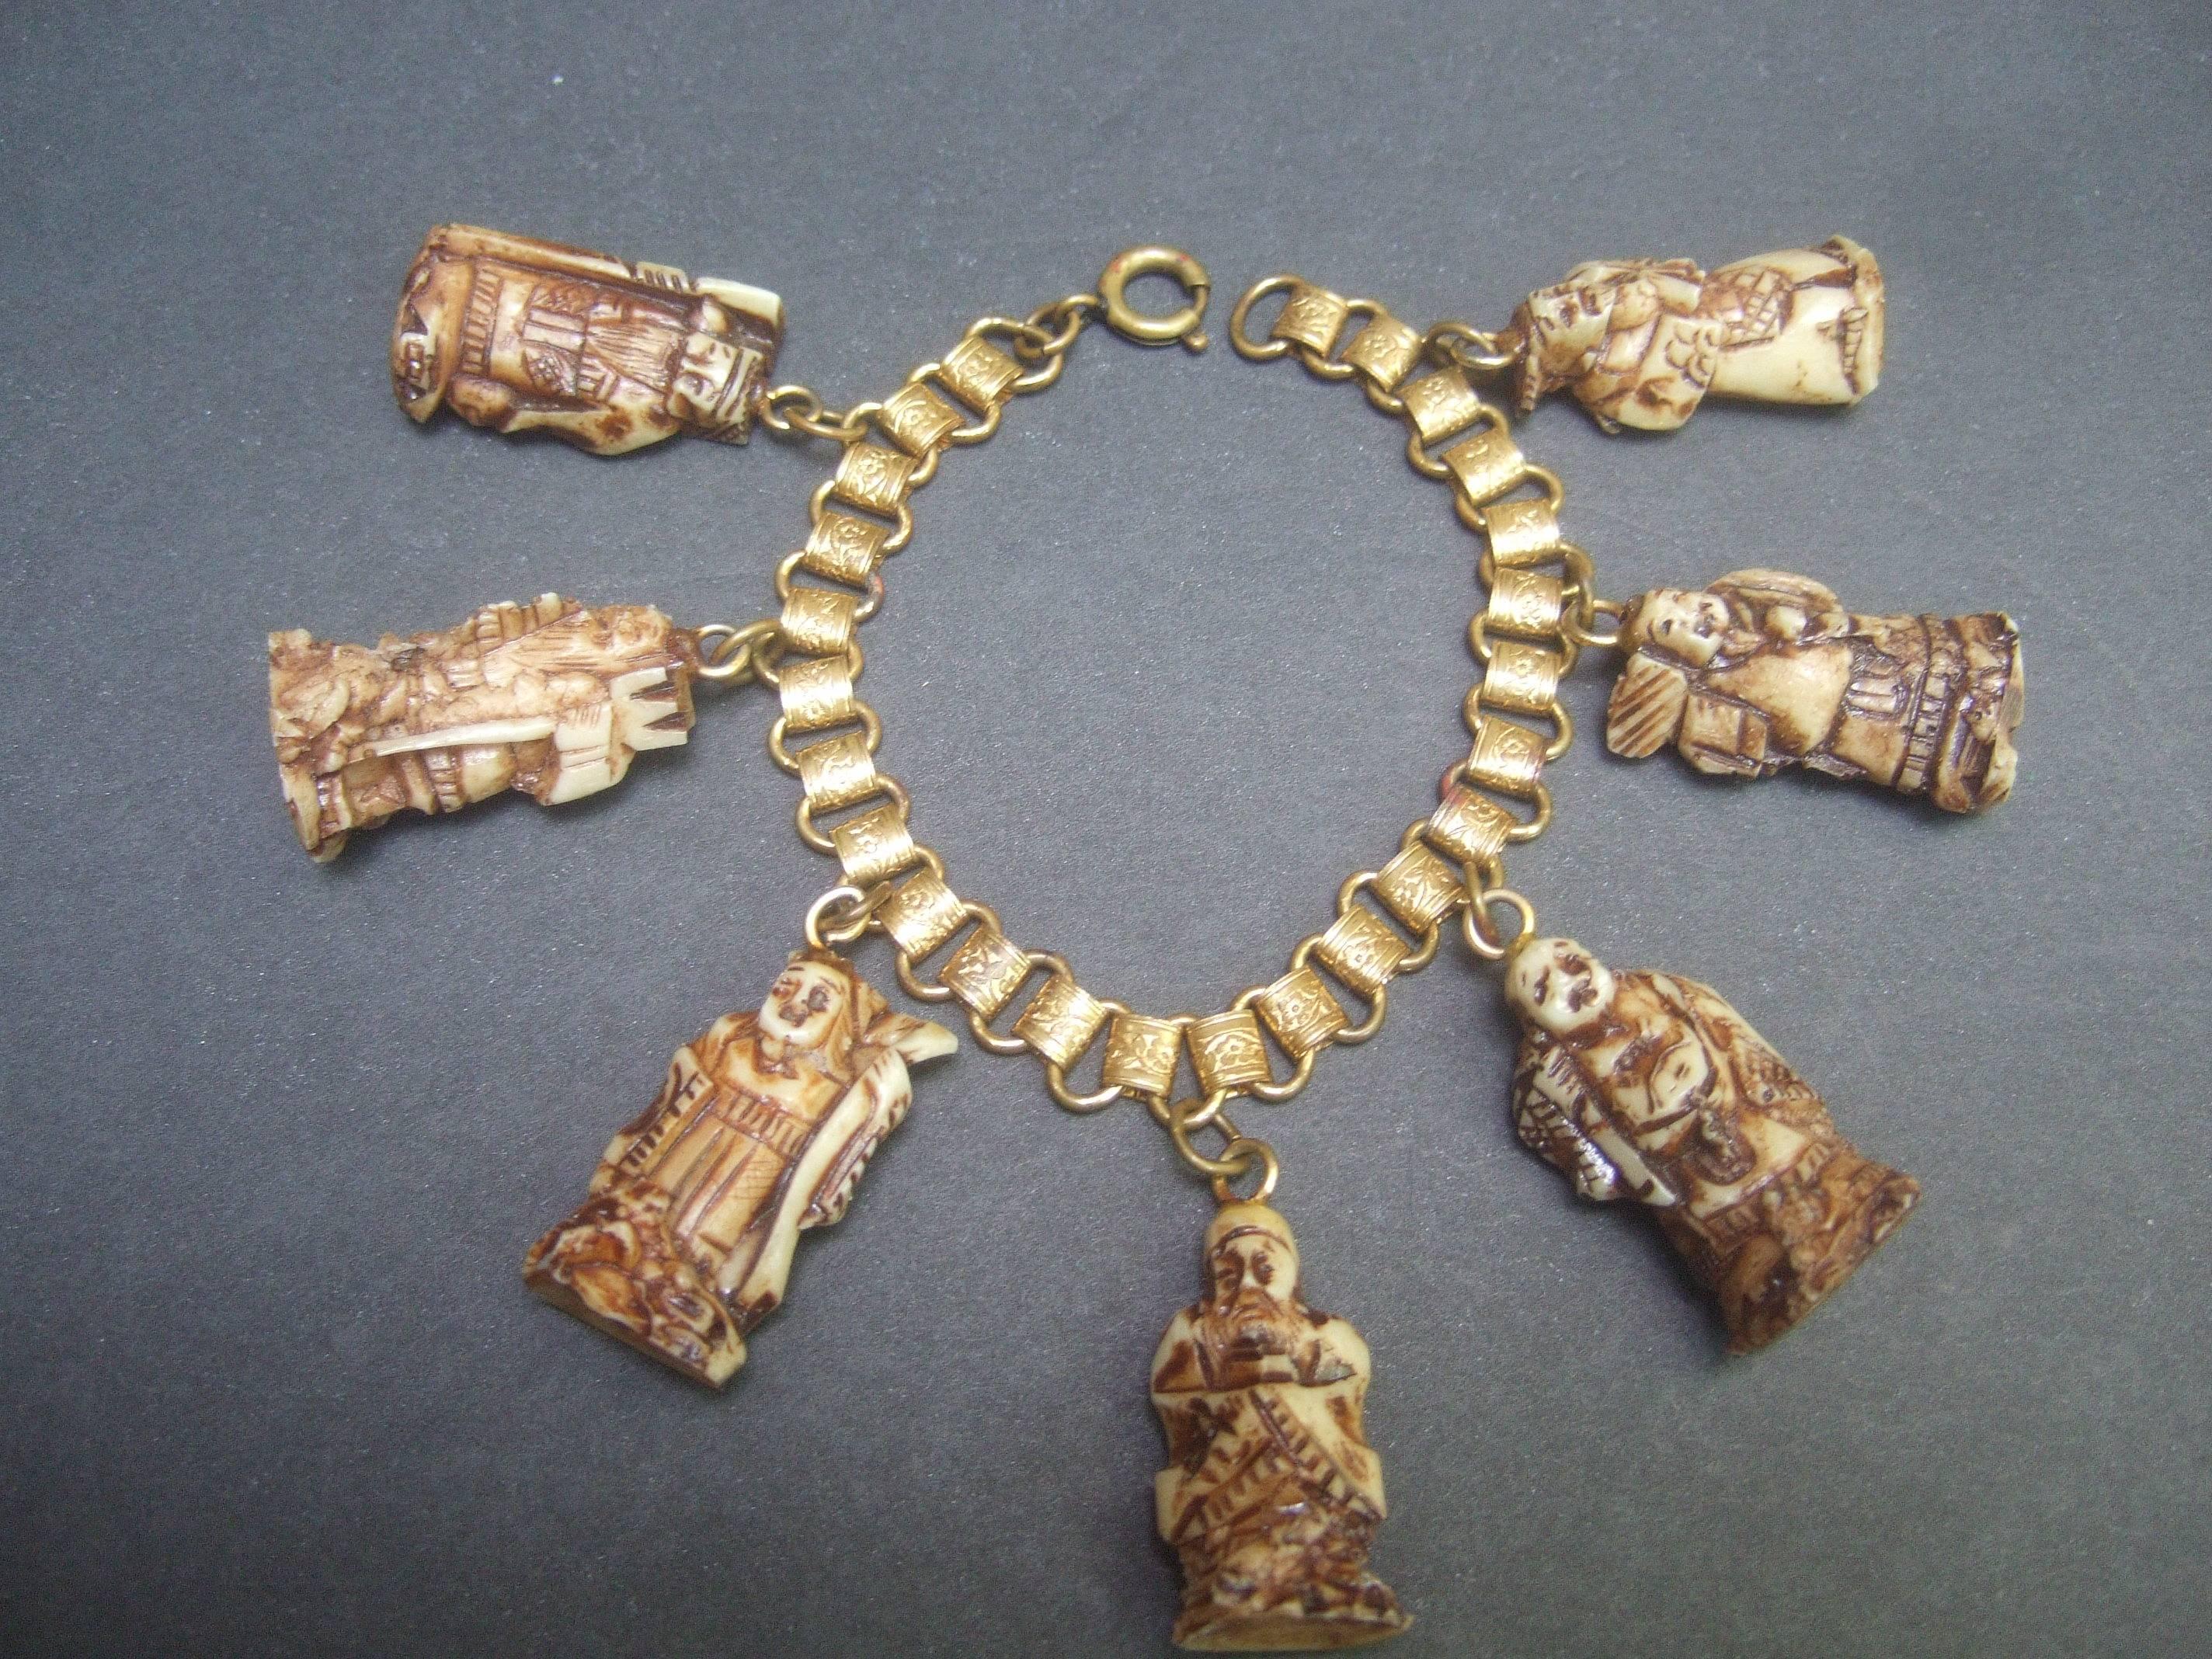 Seven Lucky Immortal Gods of Fortune from Japan Charm Bracelet ca 1960s 3